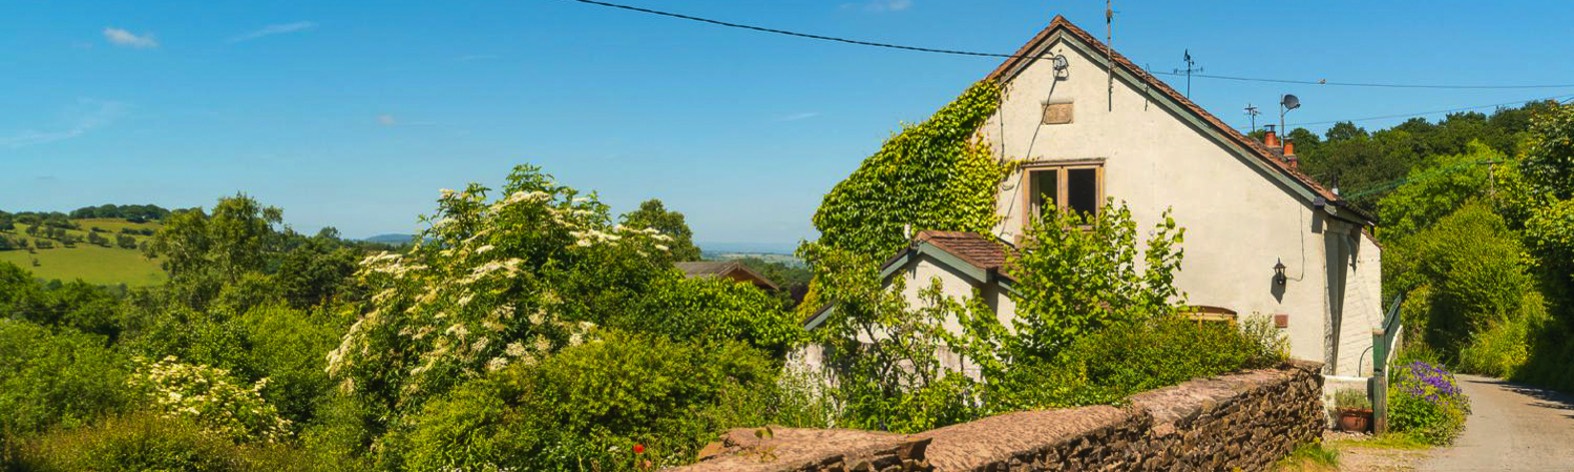 The Old Chapel, Self Catering, Stiperstones Shropshire